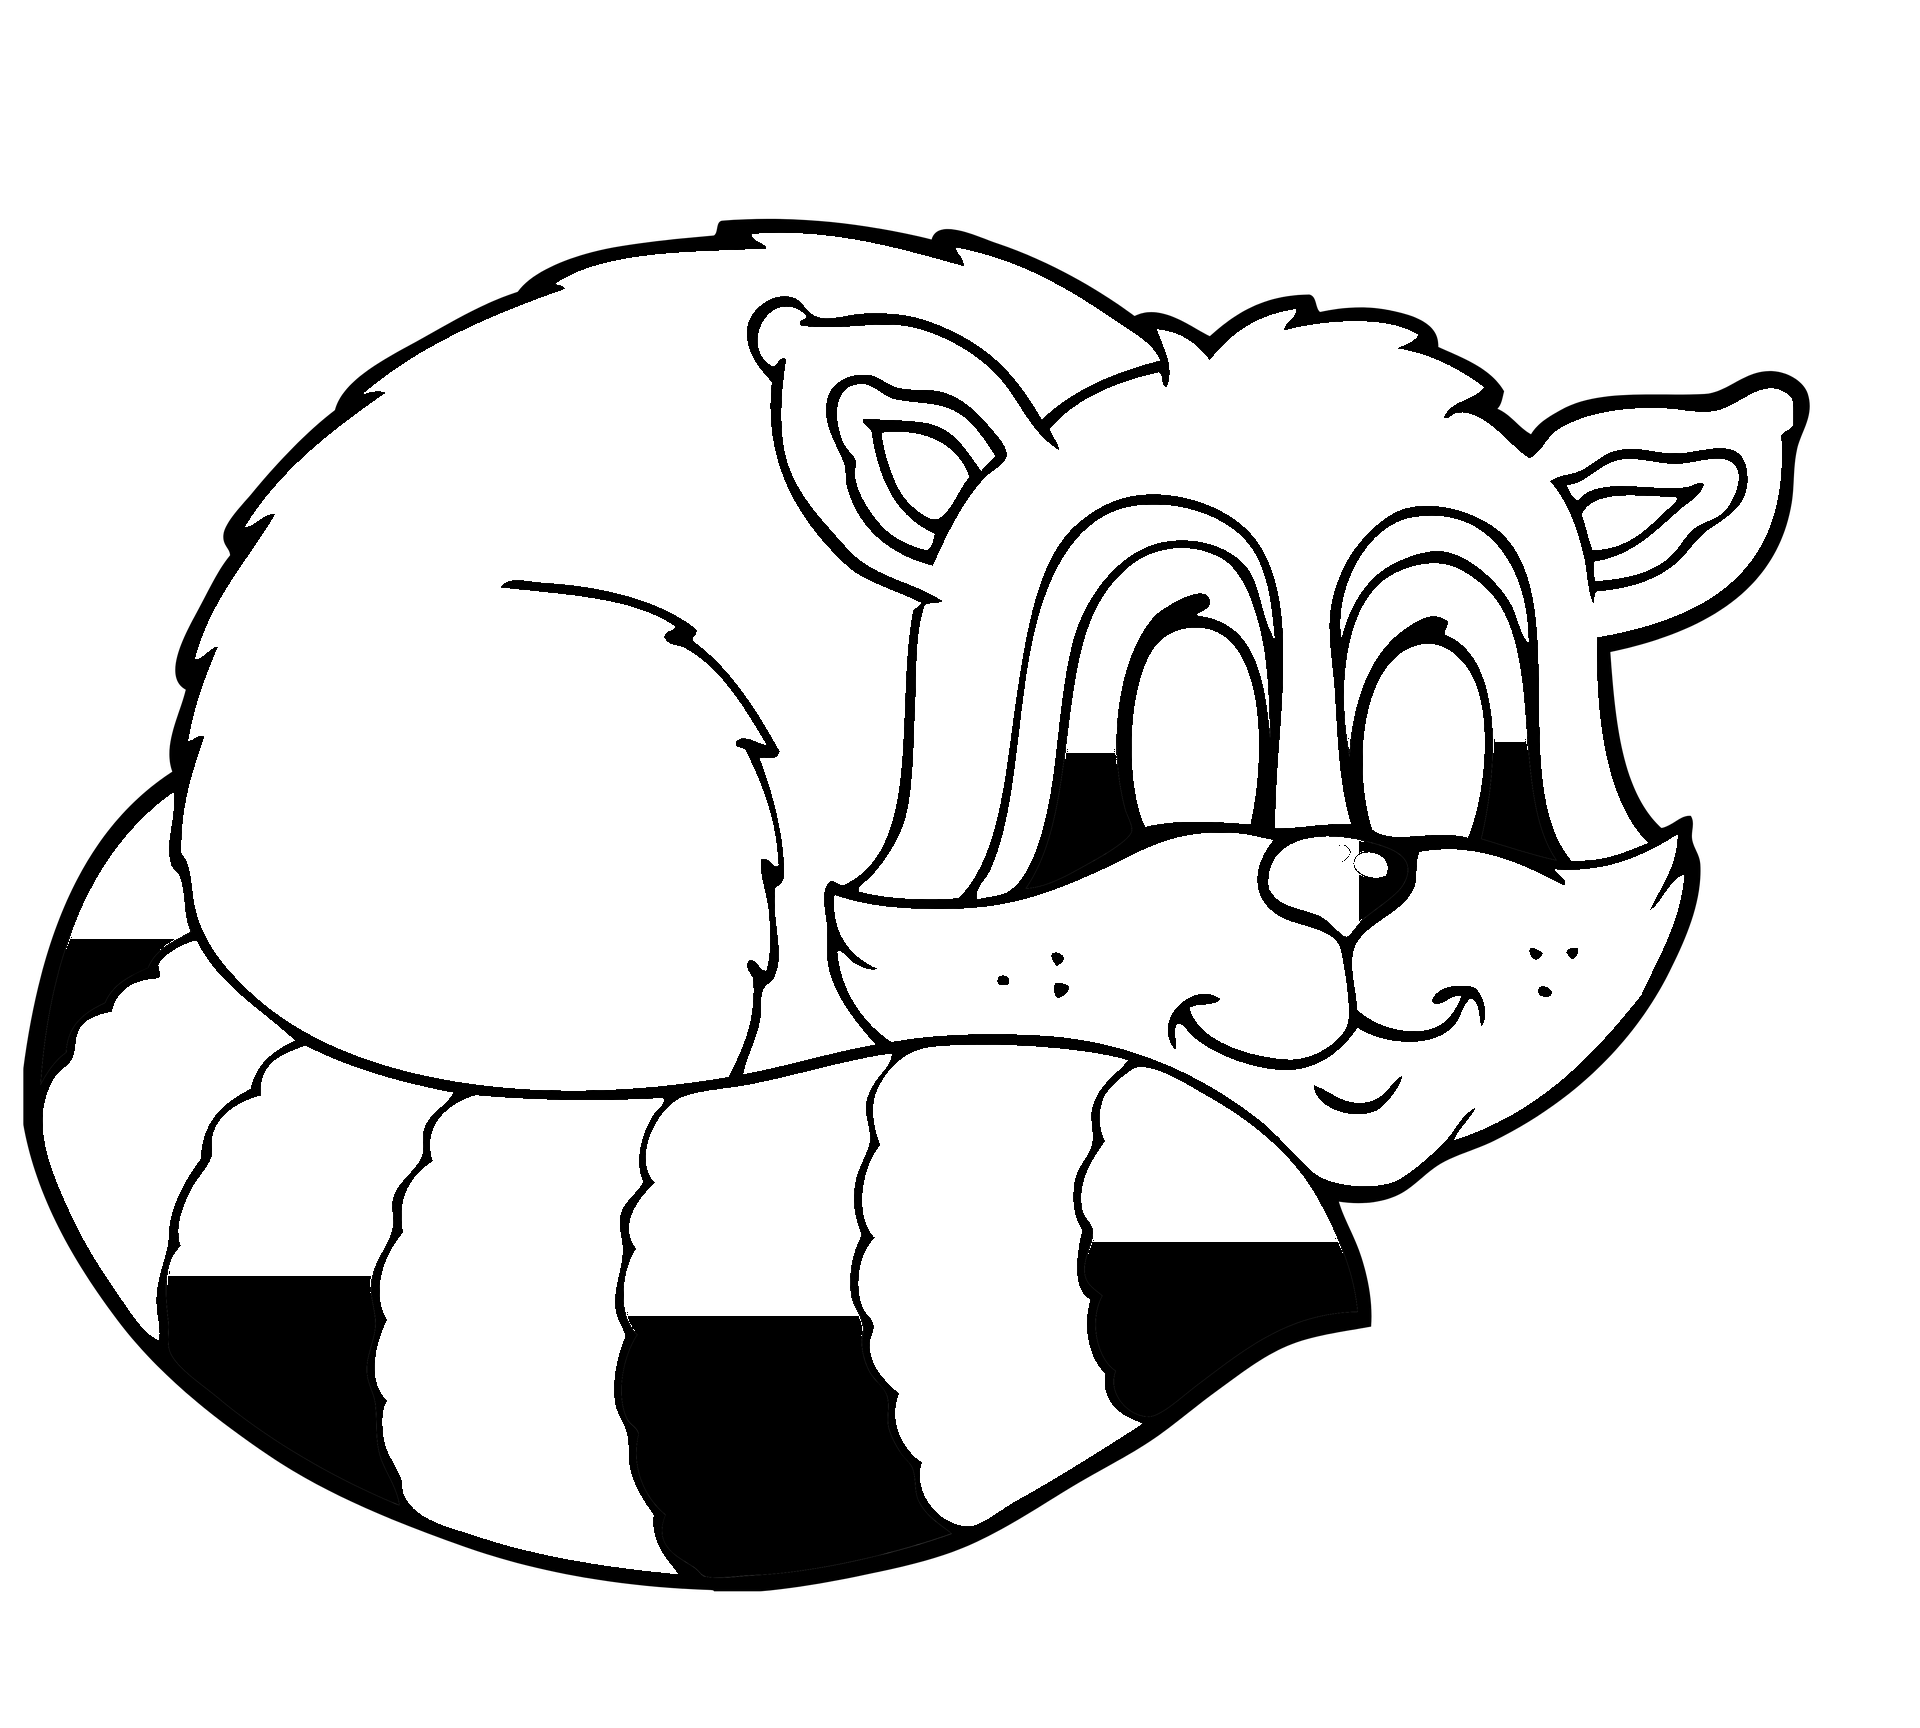 Coloring page of a raccoon